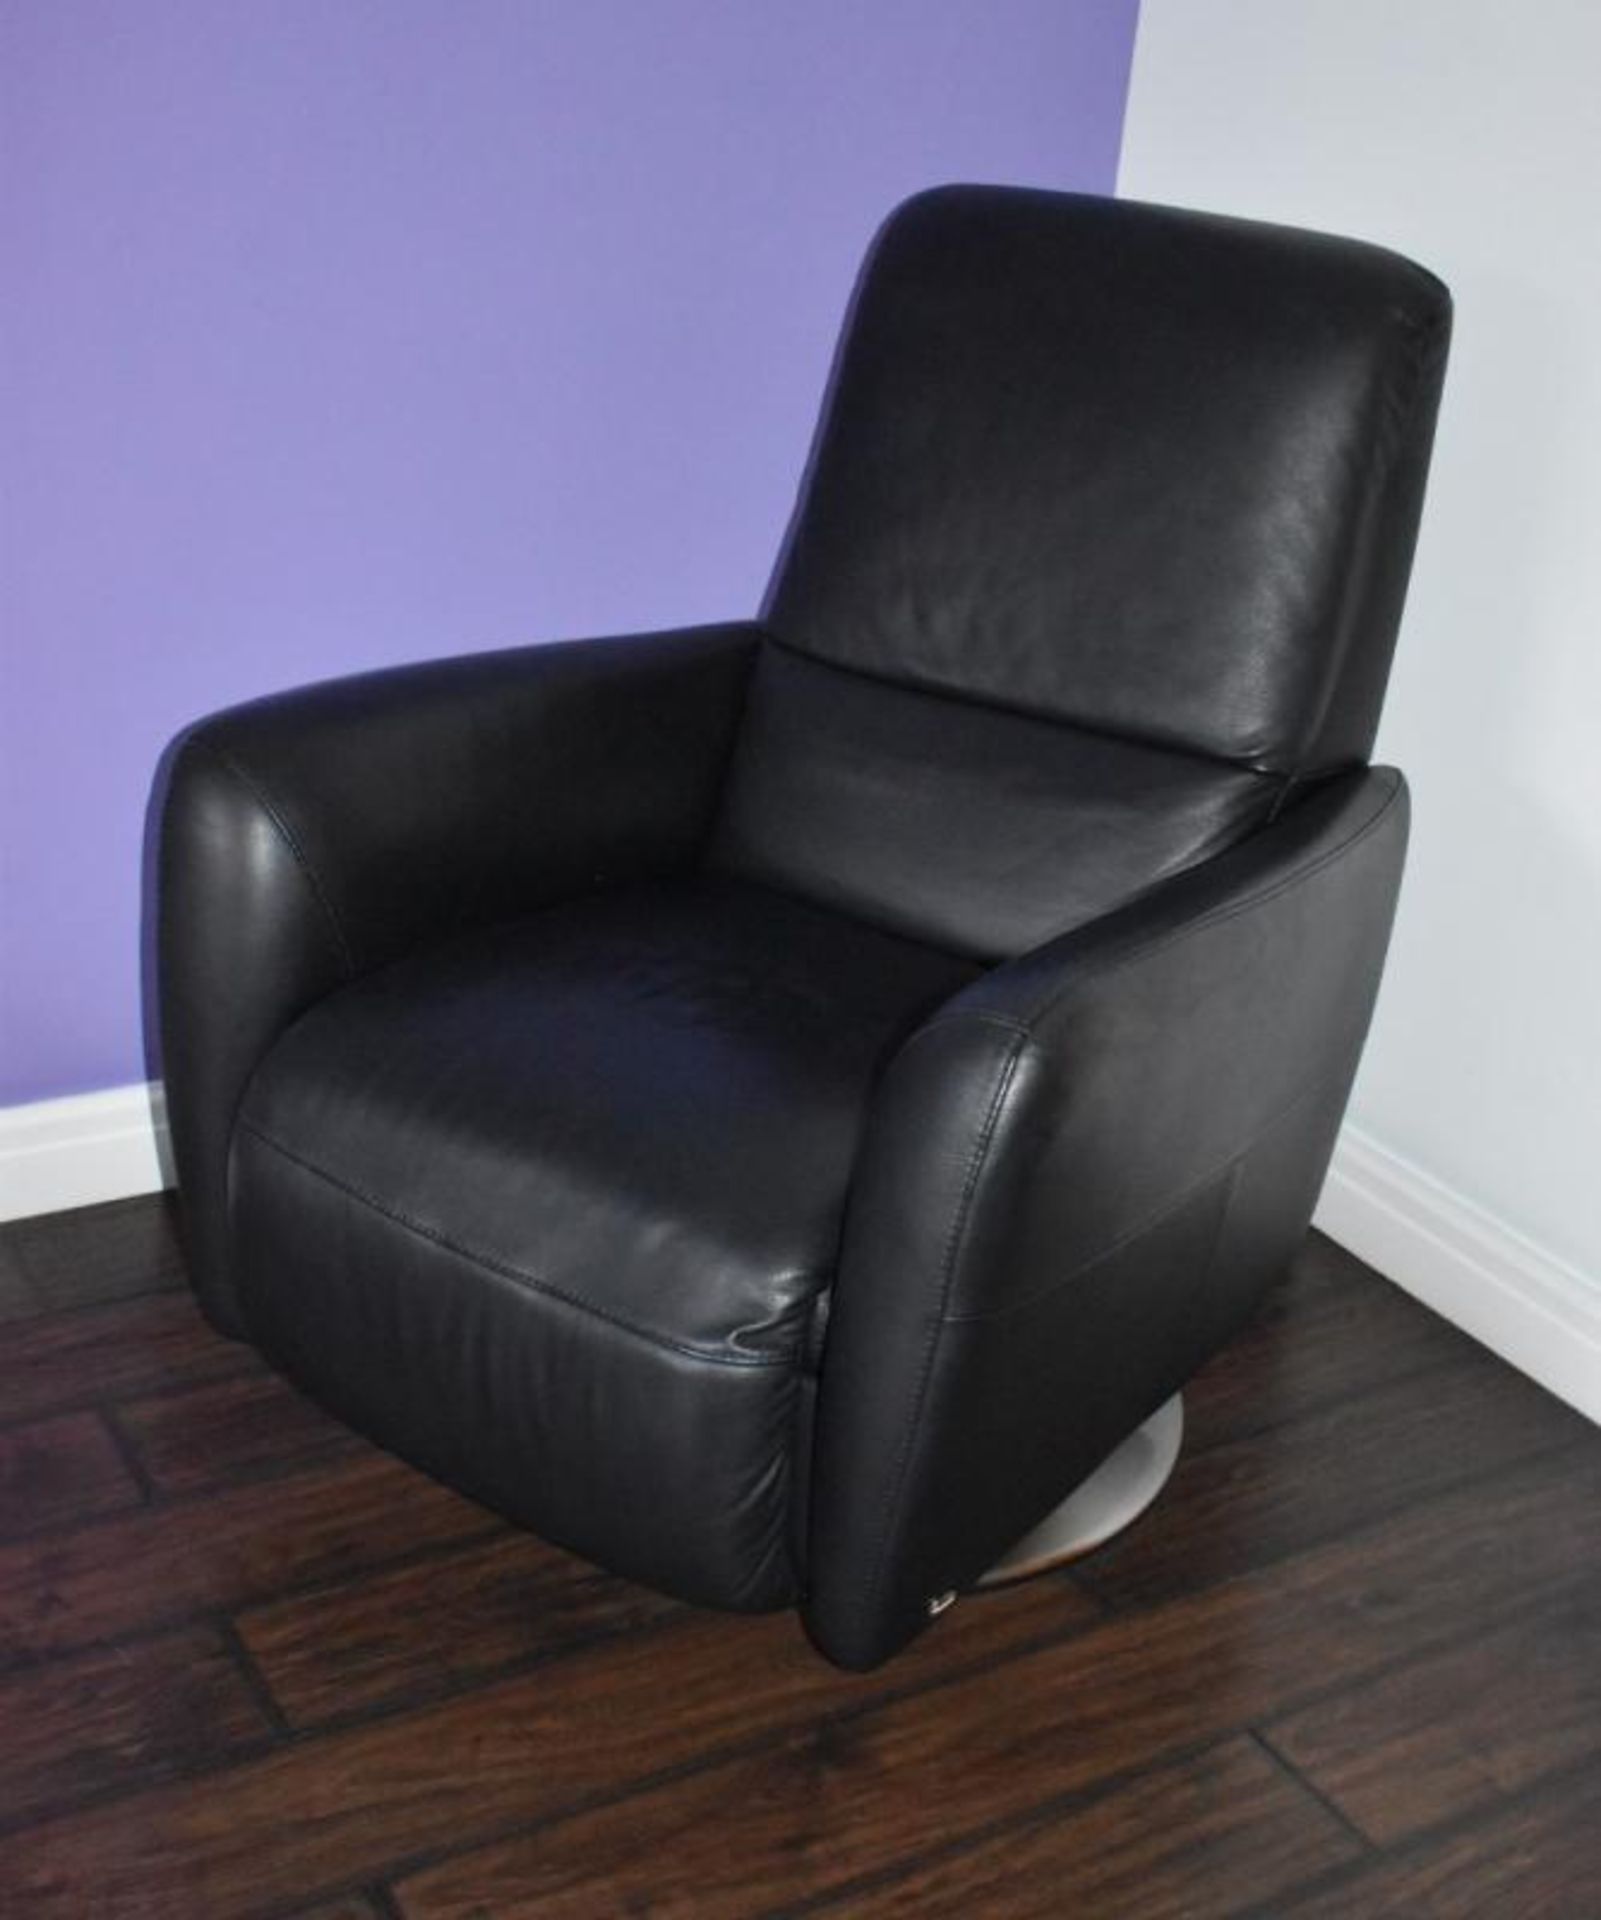 1 x Italsofa by Natuzzi Black Leather Swivel Arm Chair - CL469 - Location: Prestwich M25 - NO VAT - Image 5 of 7